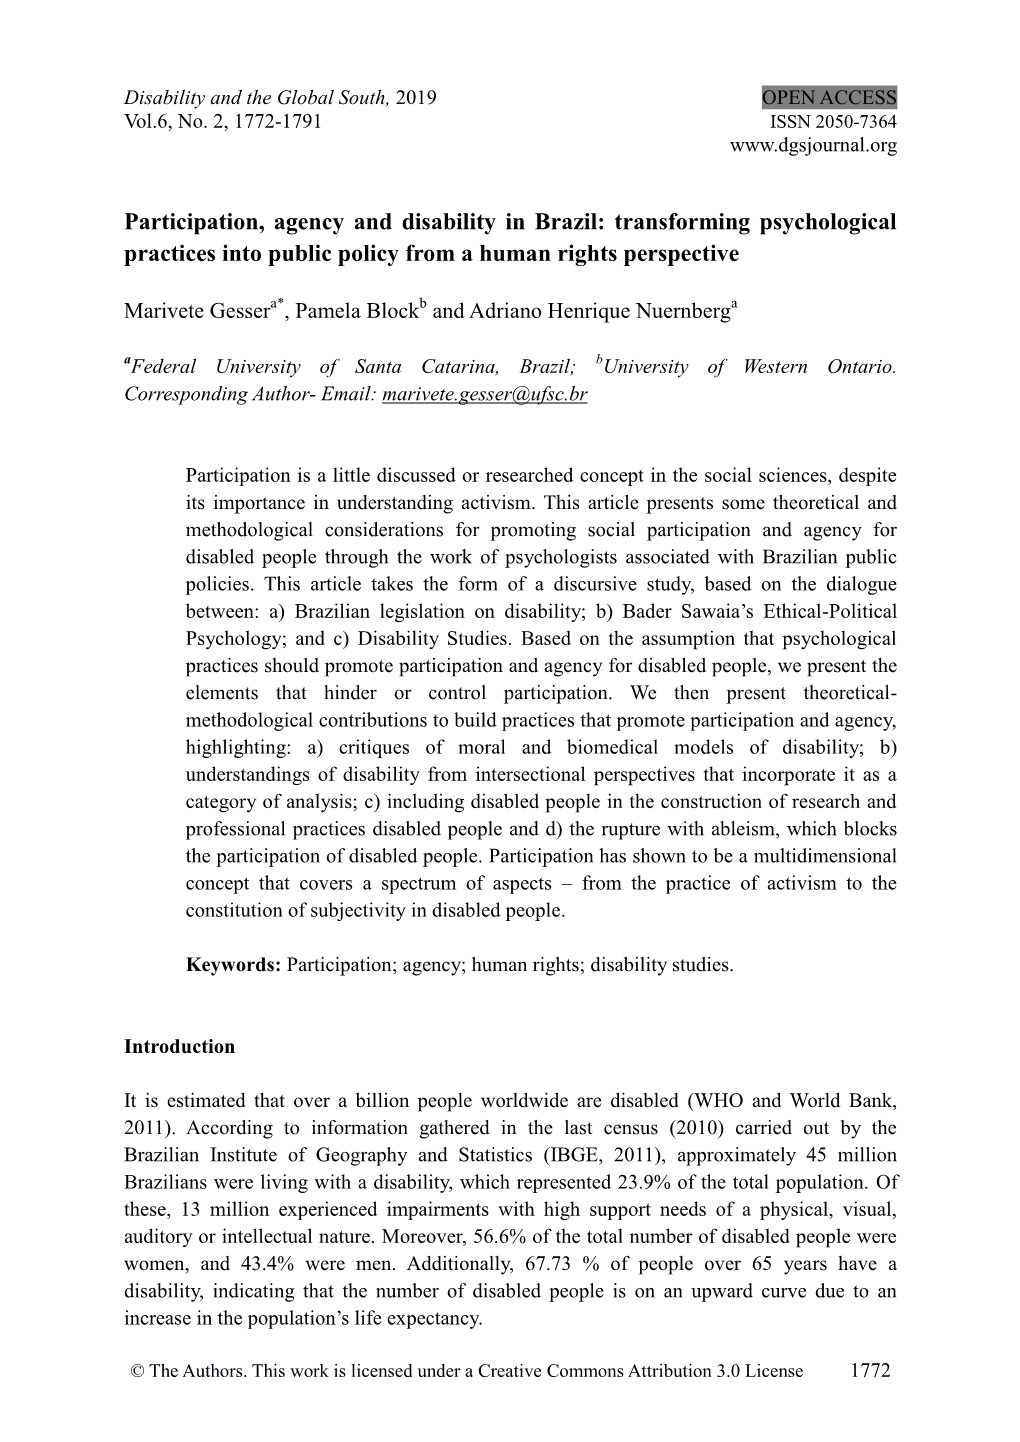 Participation, Agency and Disability in Brazil: Transforming Psychological Practices Into Public Policy from a Human Rights Perspective